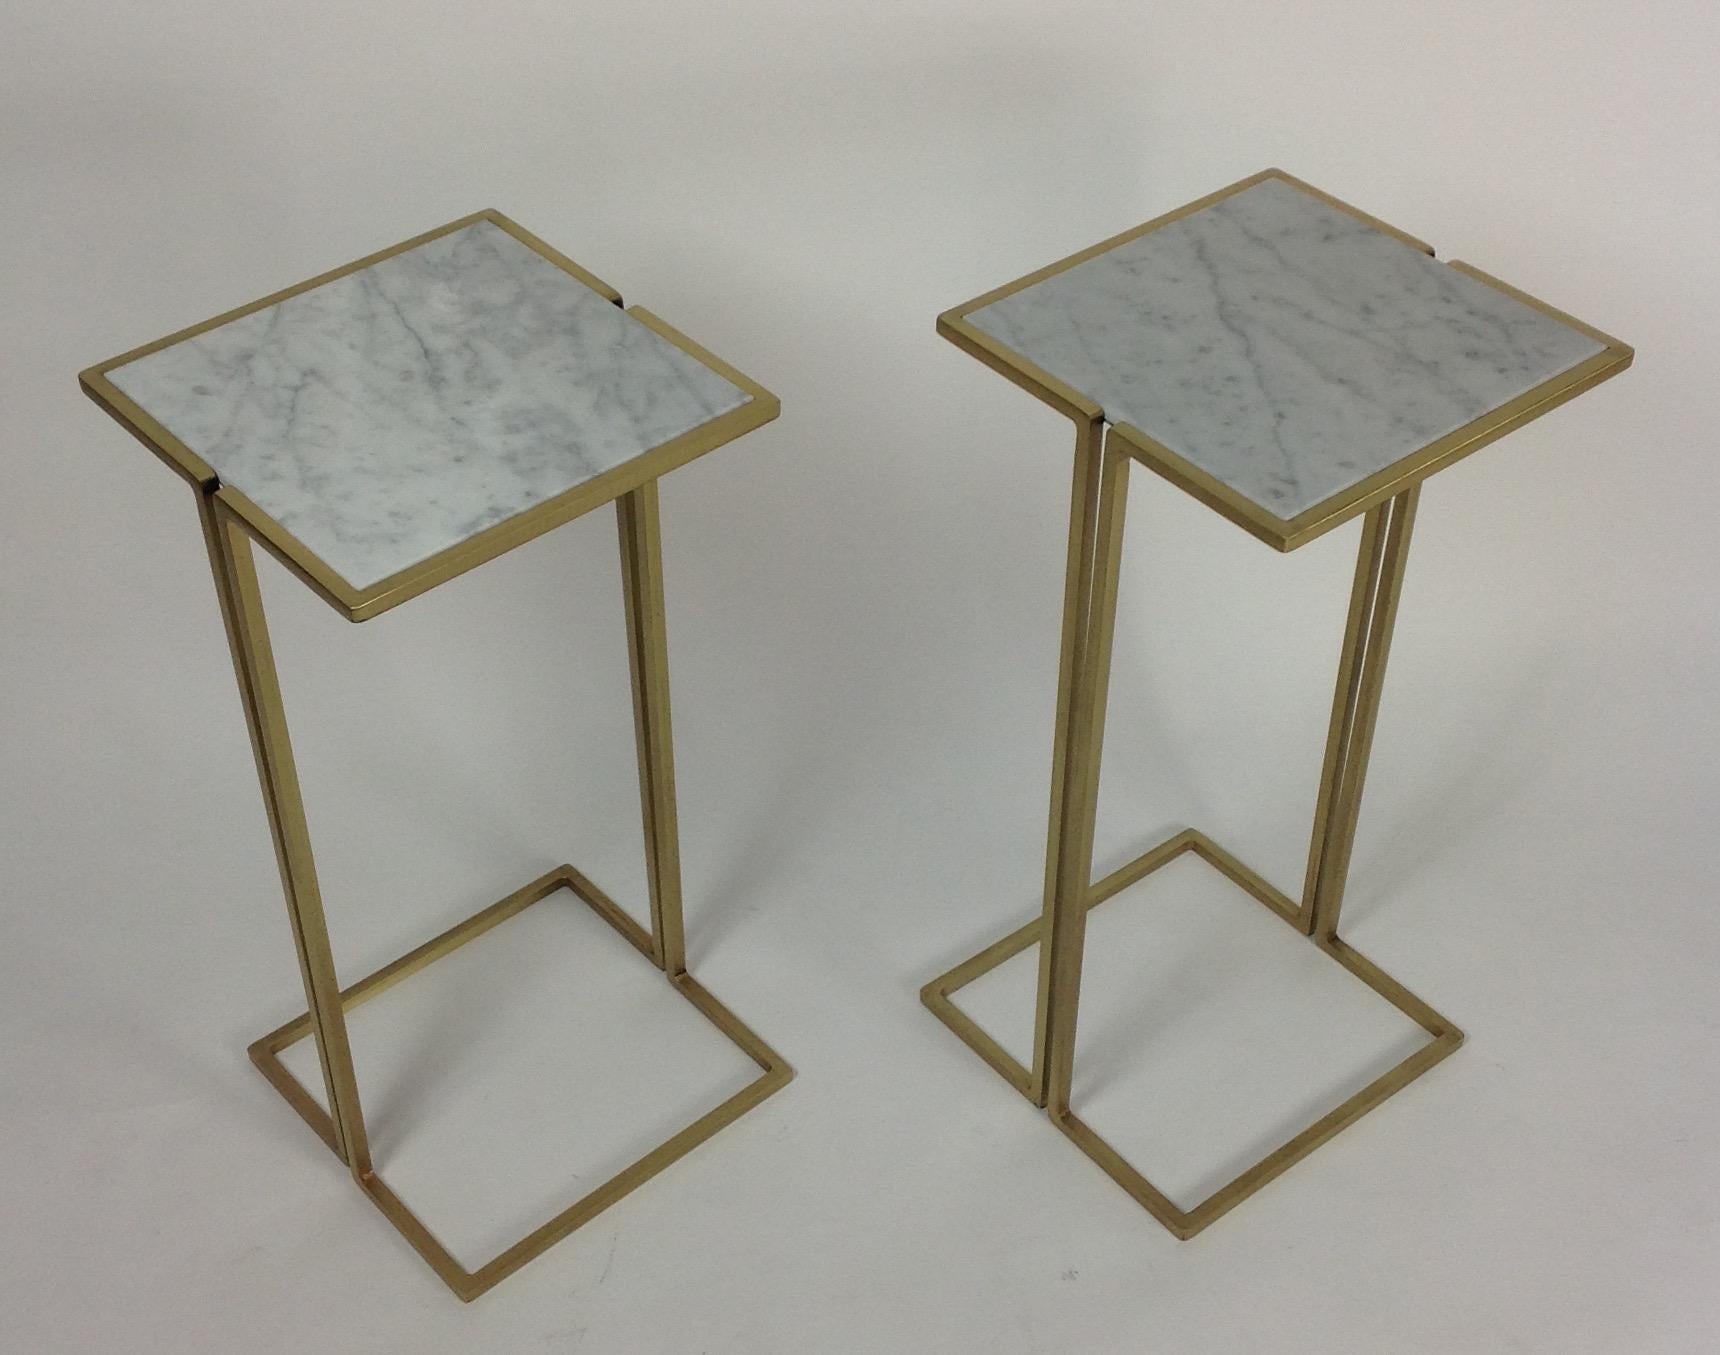 Plated Nantes Side Tables, Model D, Satin Brass by Bourgeois Boheme Atelier